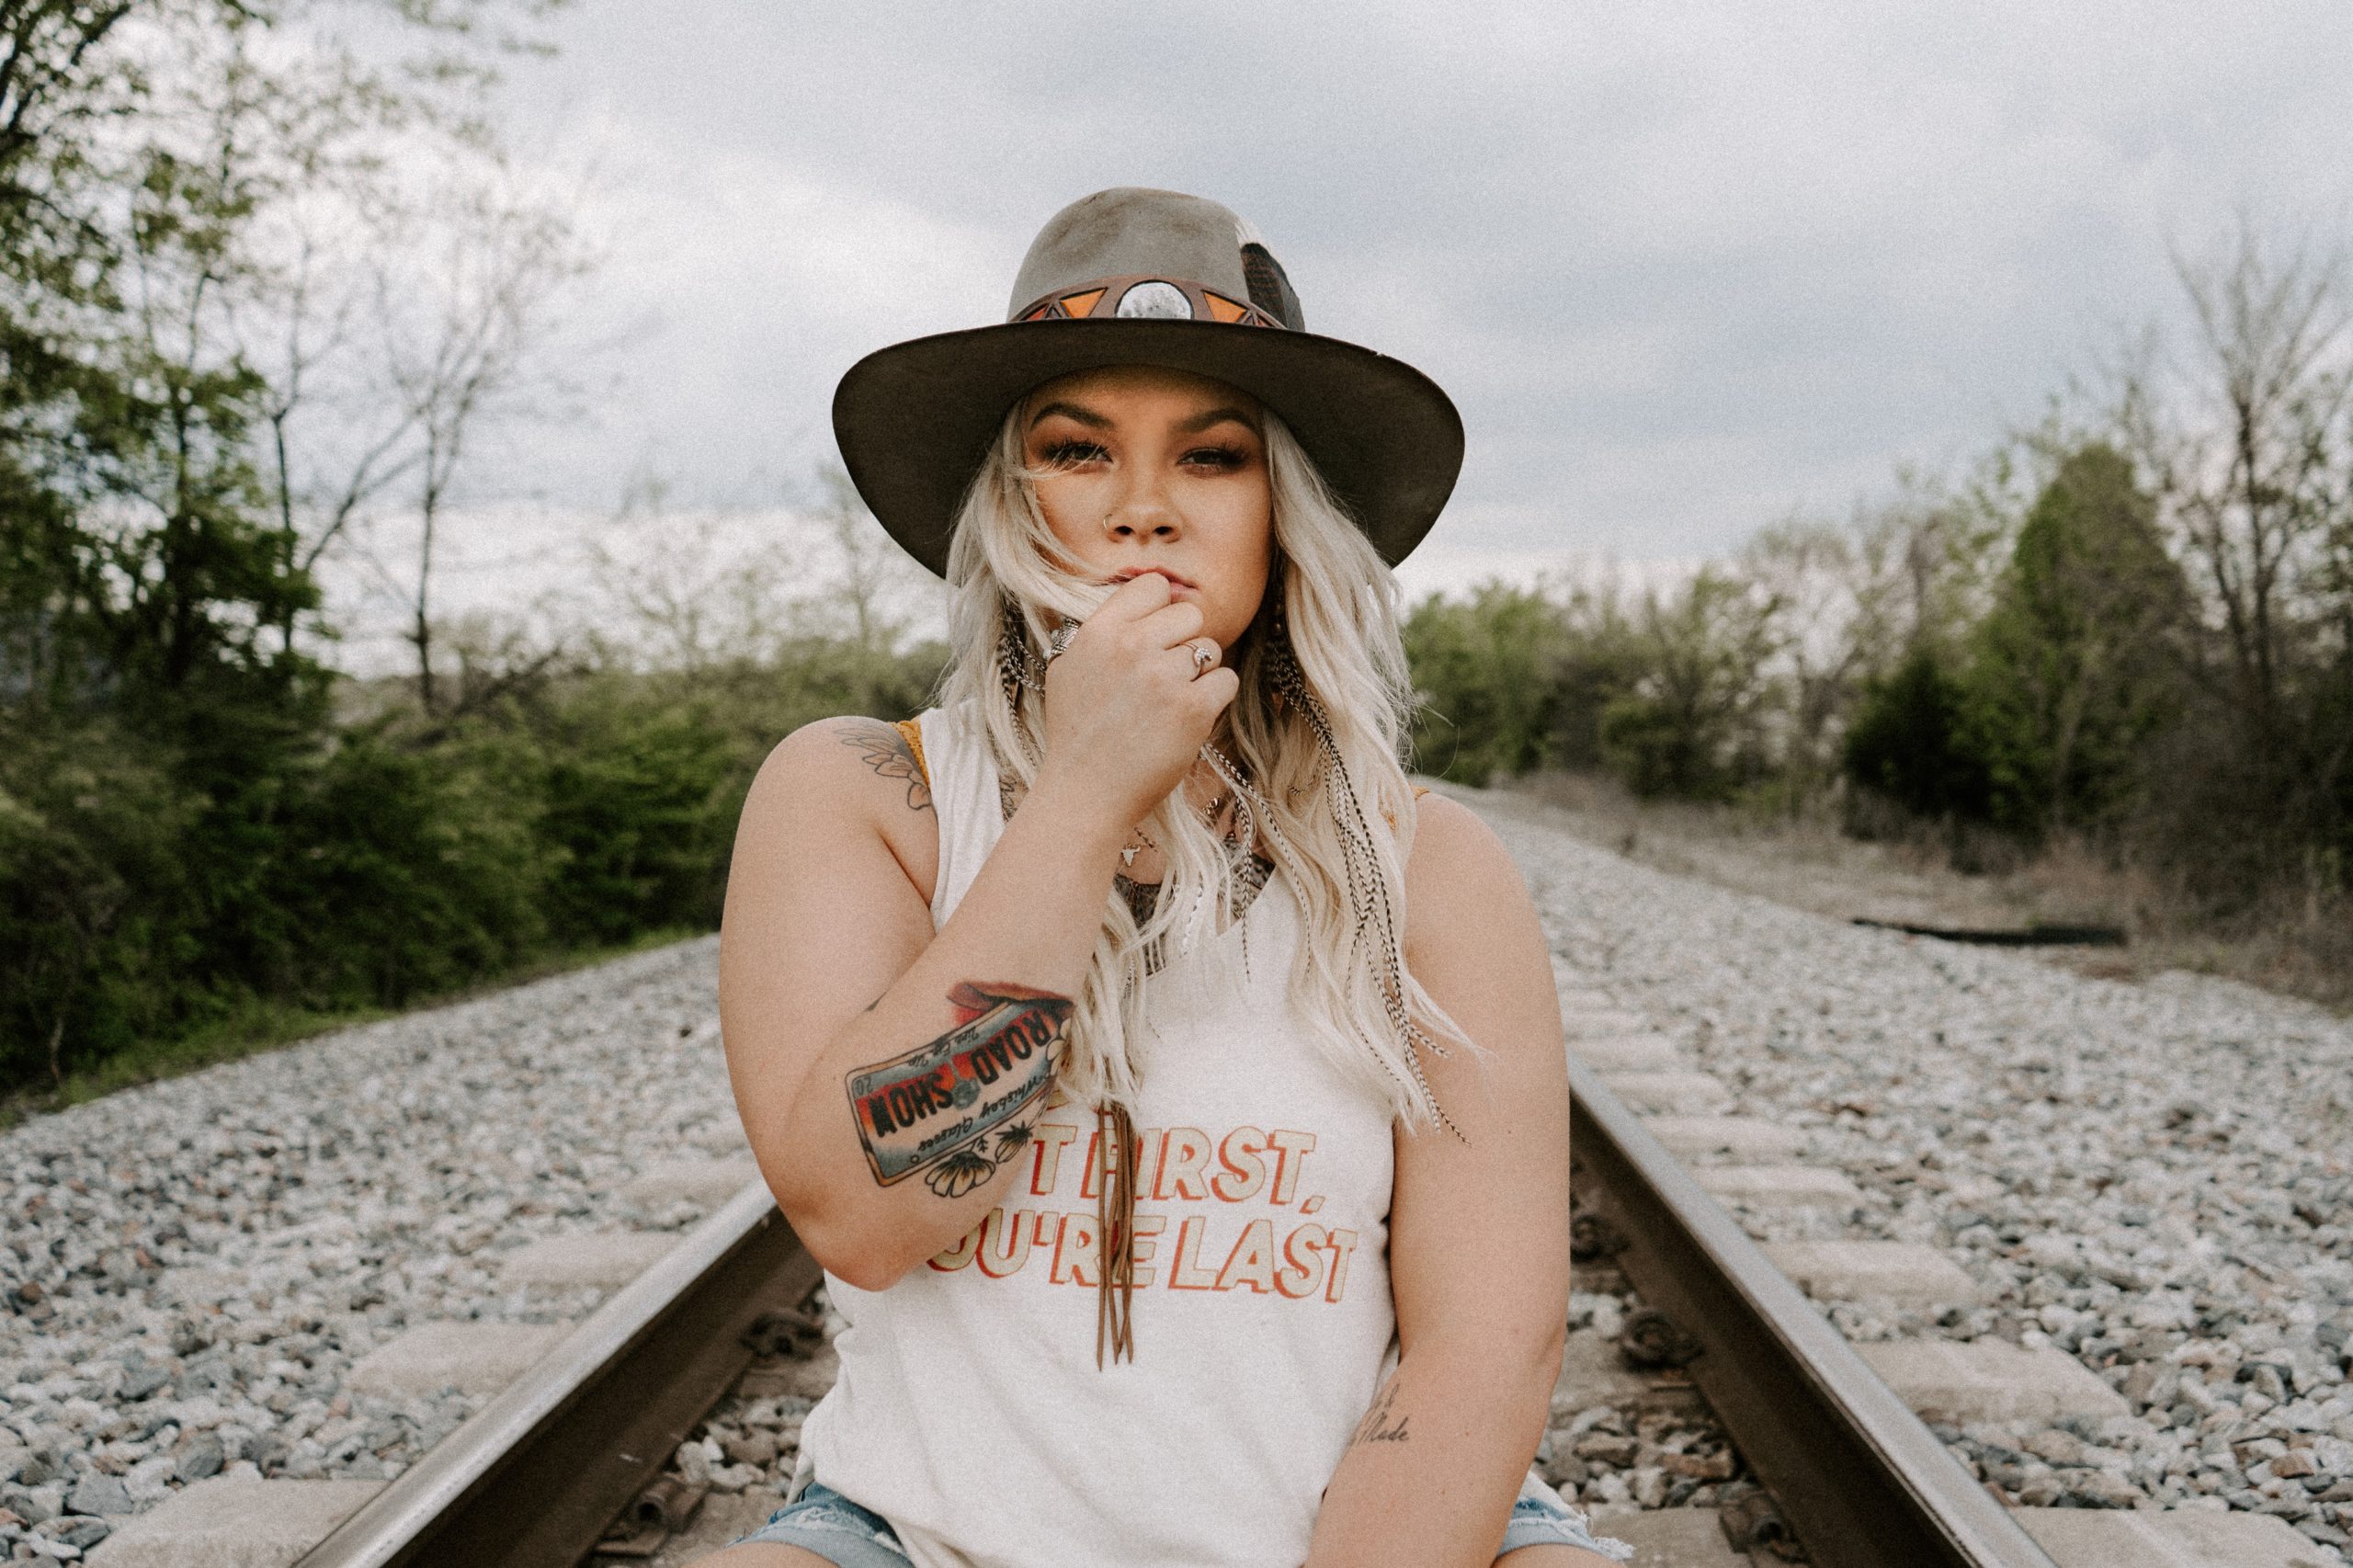 Get To Know Ashland Craft: The South Carolina Native Who Is Country Music’s Next Female Badass (Exclusive)